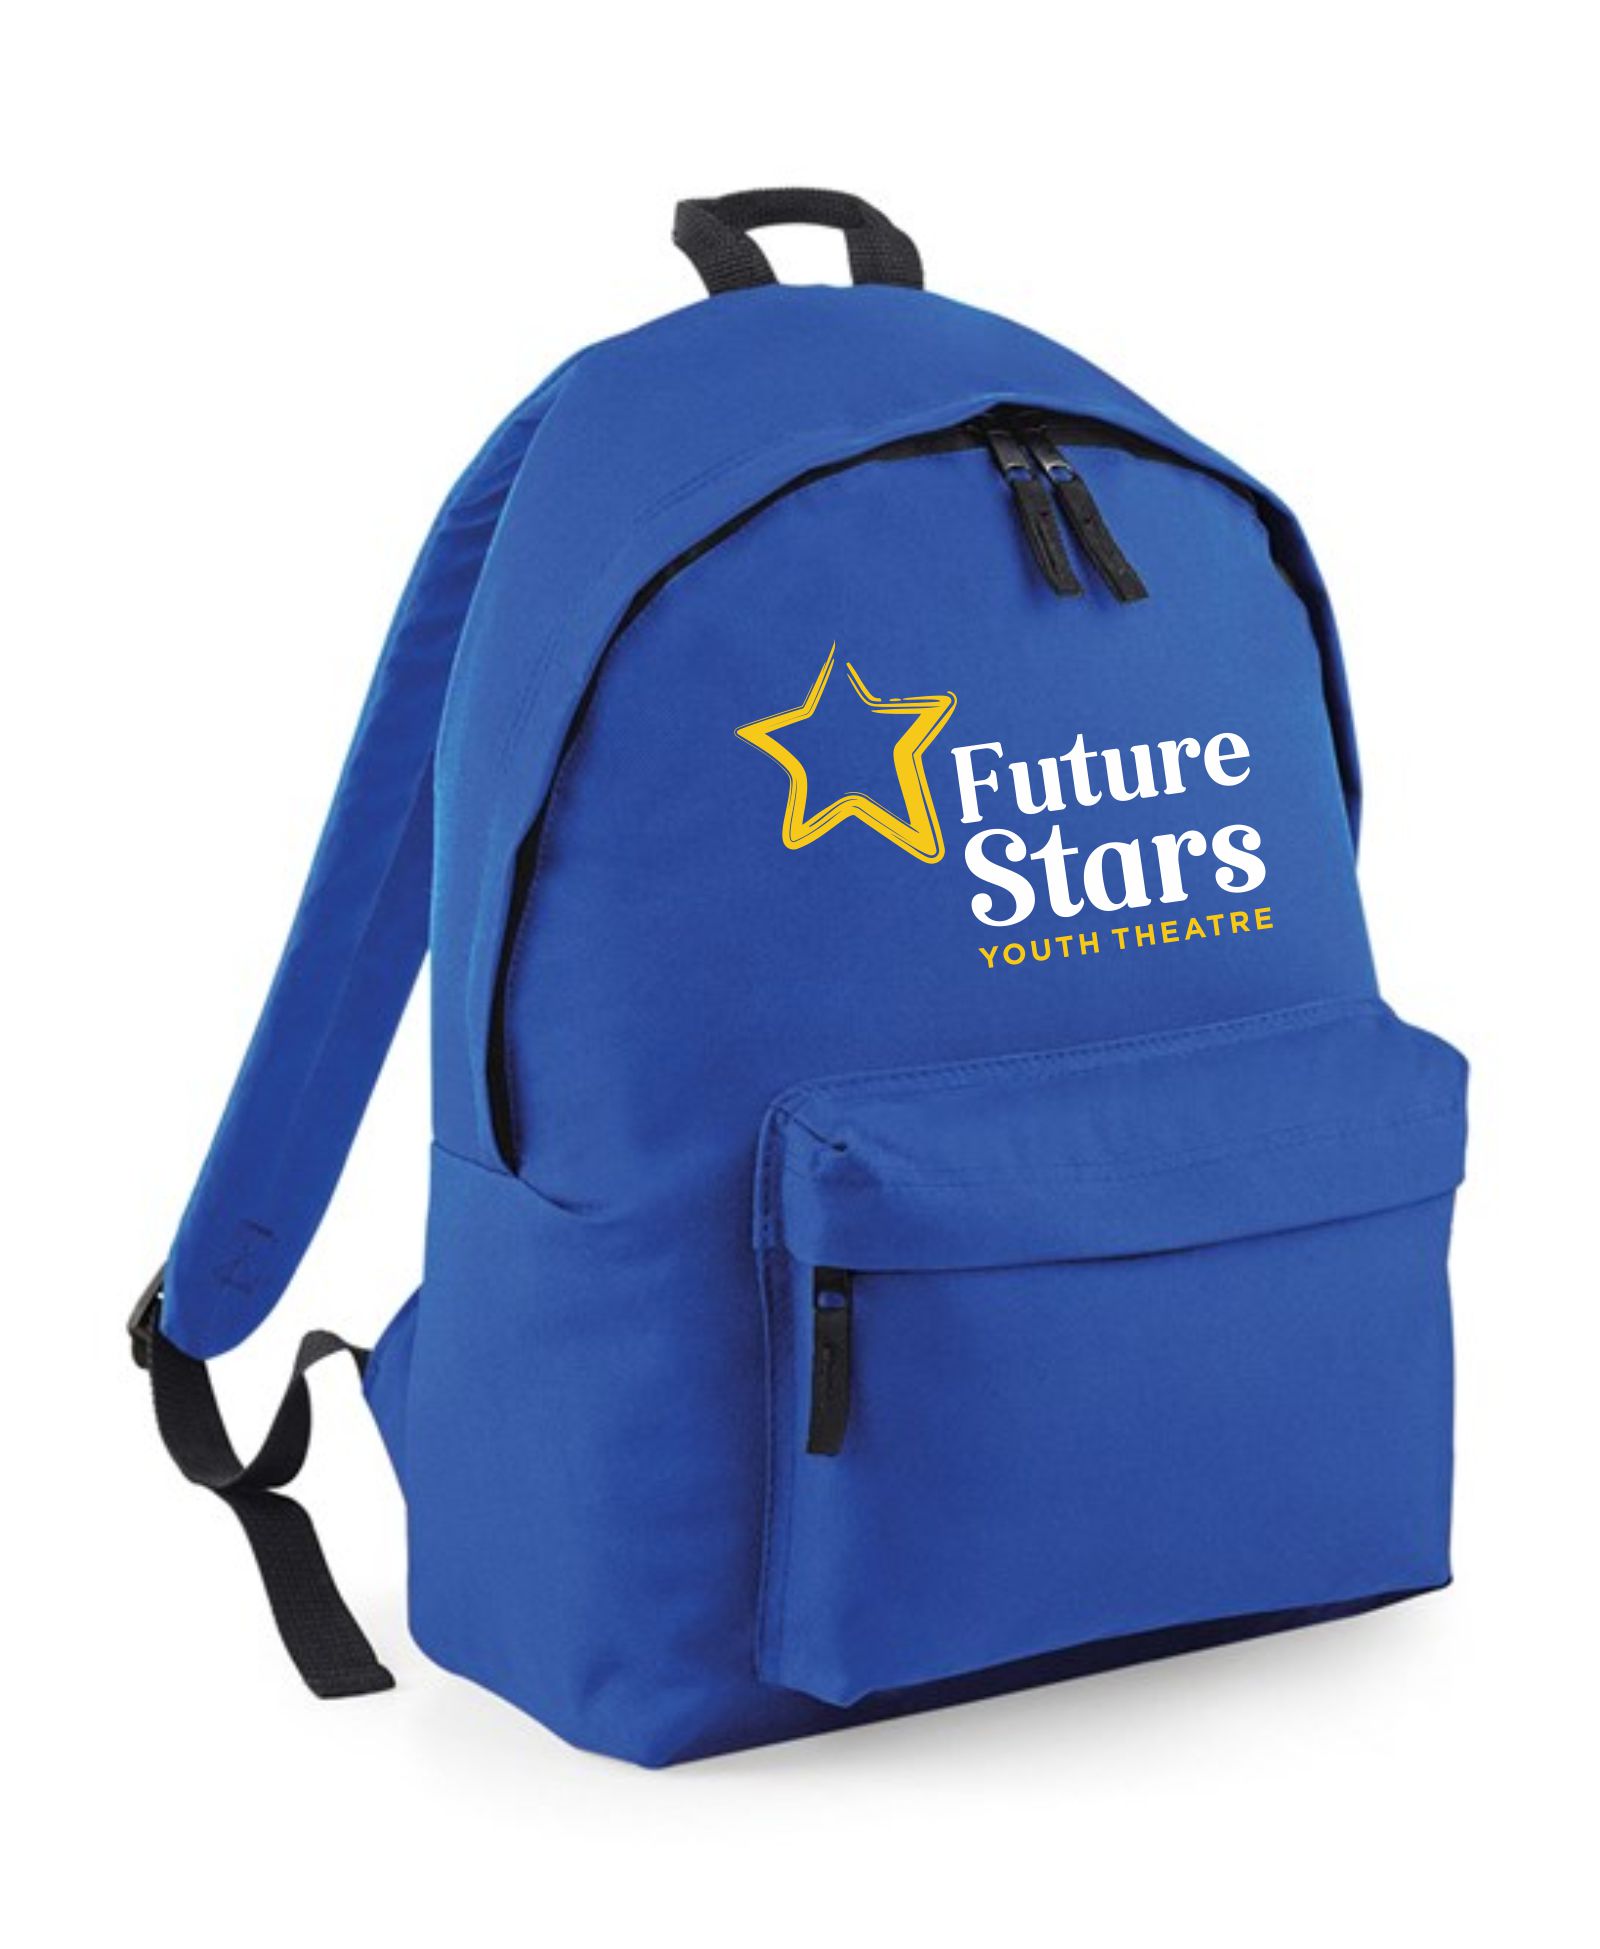 Future Stars Youth Theatre – Backpack 